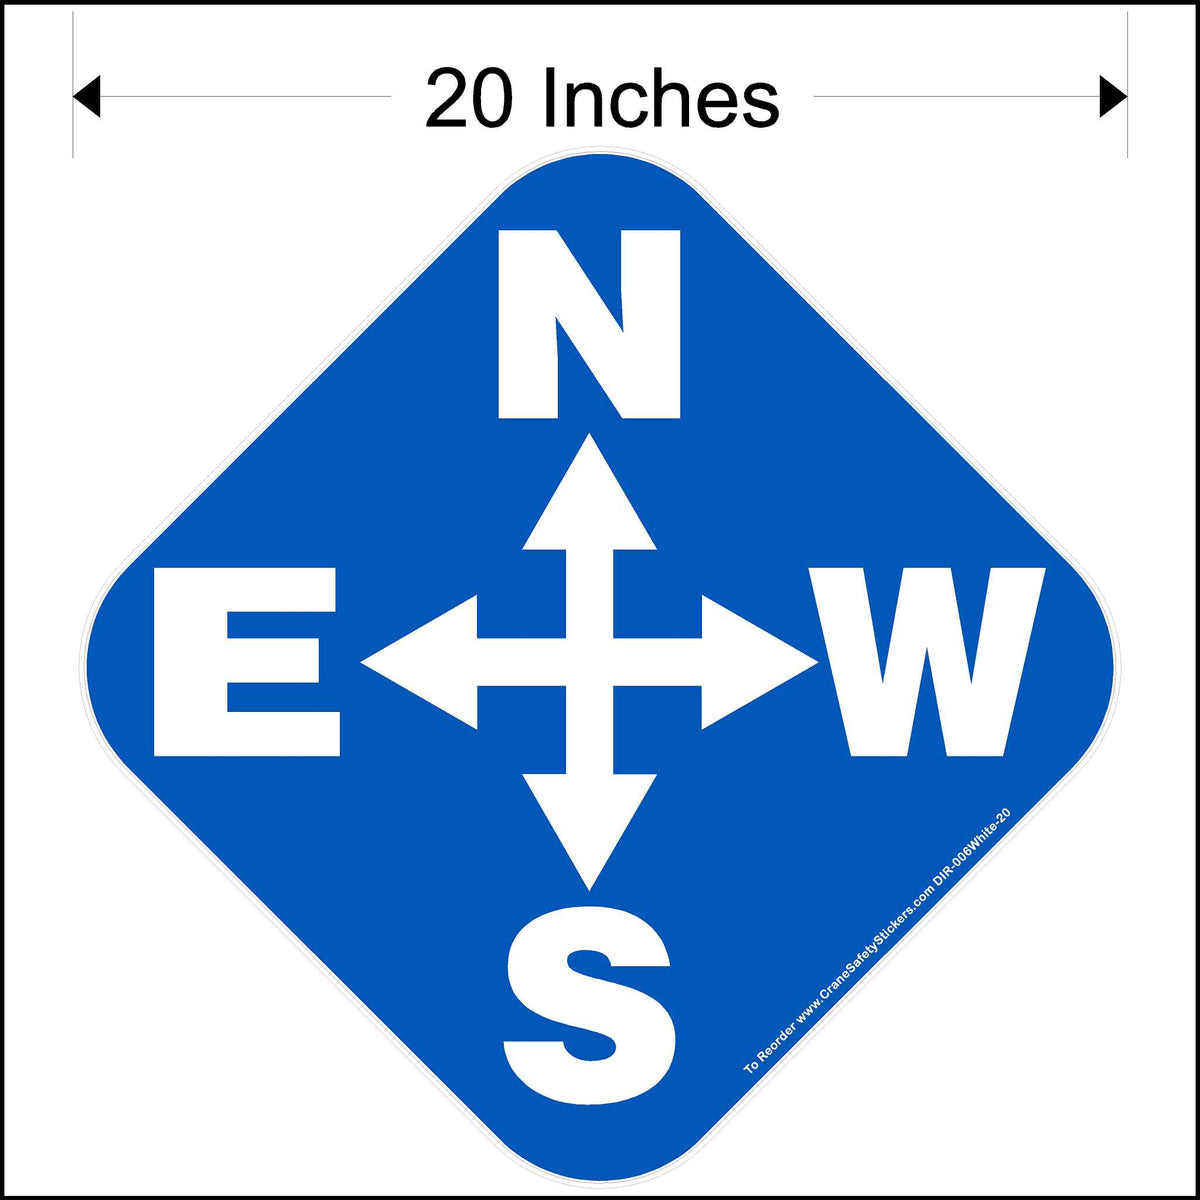 Overhead directional crane decal with white lettering and blue background. Decal size is 20 inches square.